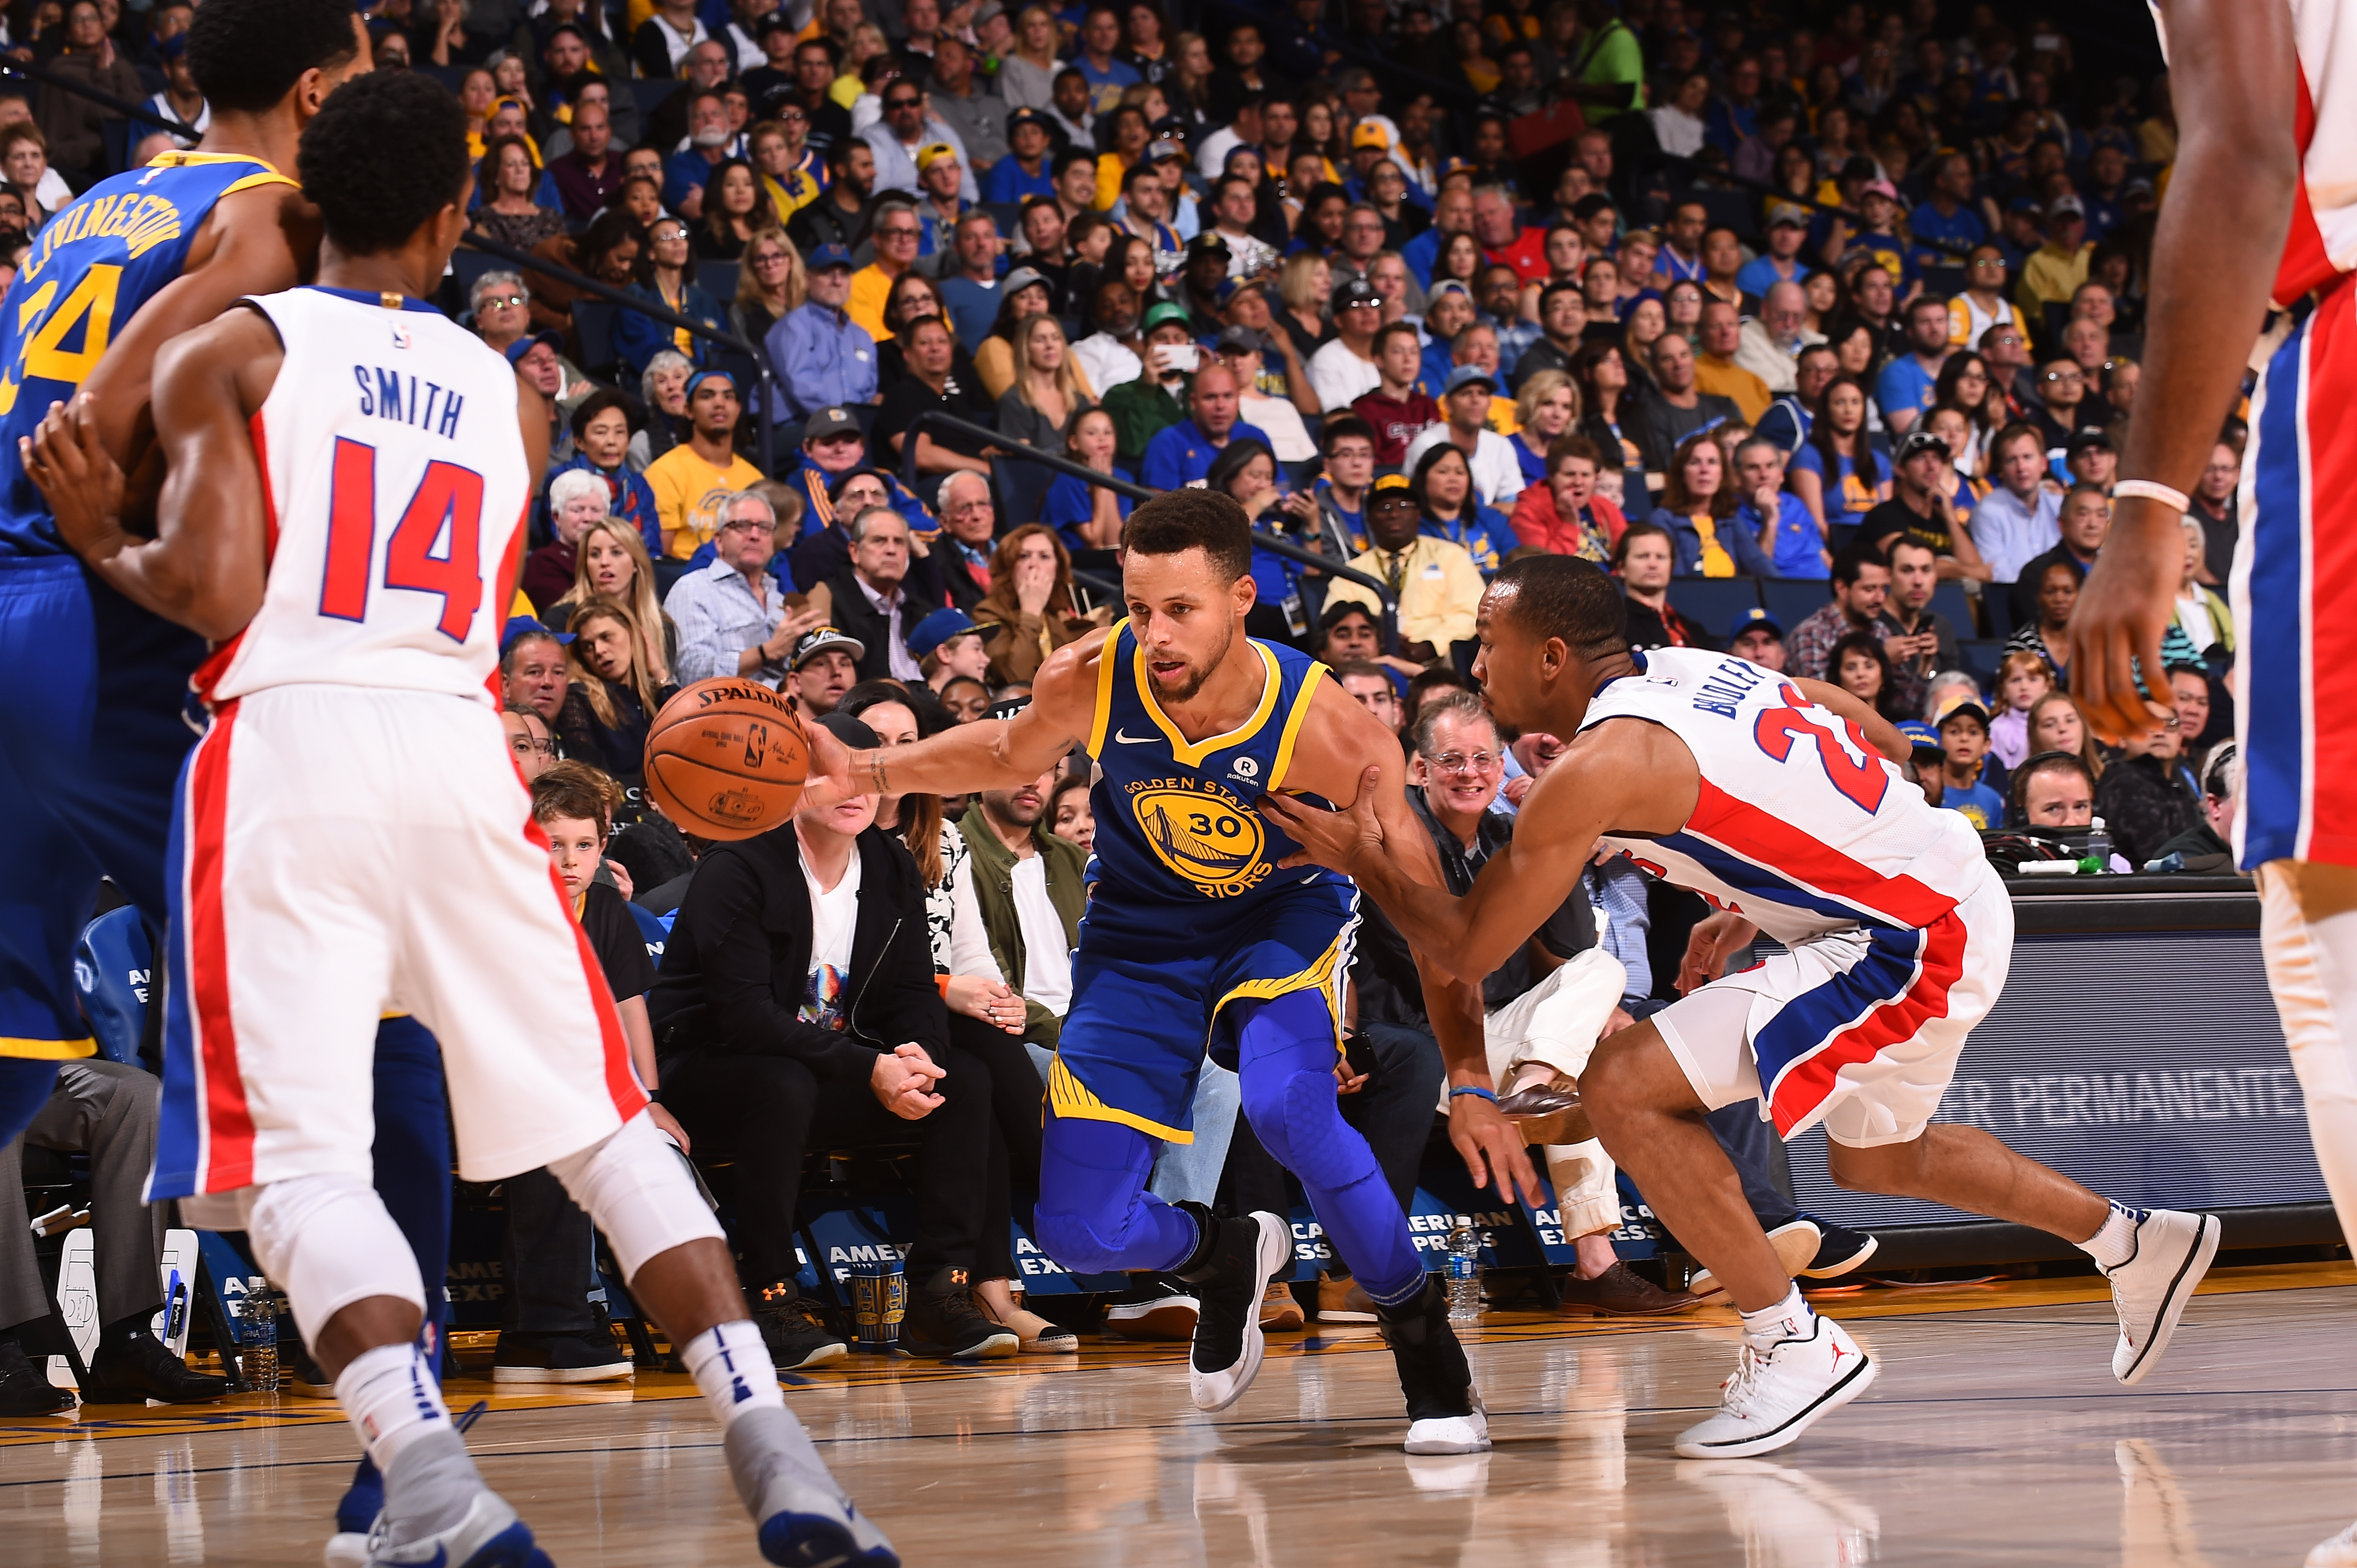 Detroit Pistons 111, Golden State Warriors 102: Photos from LCA